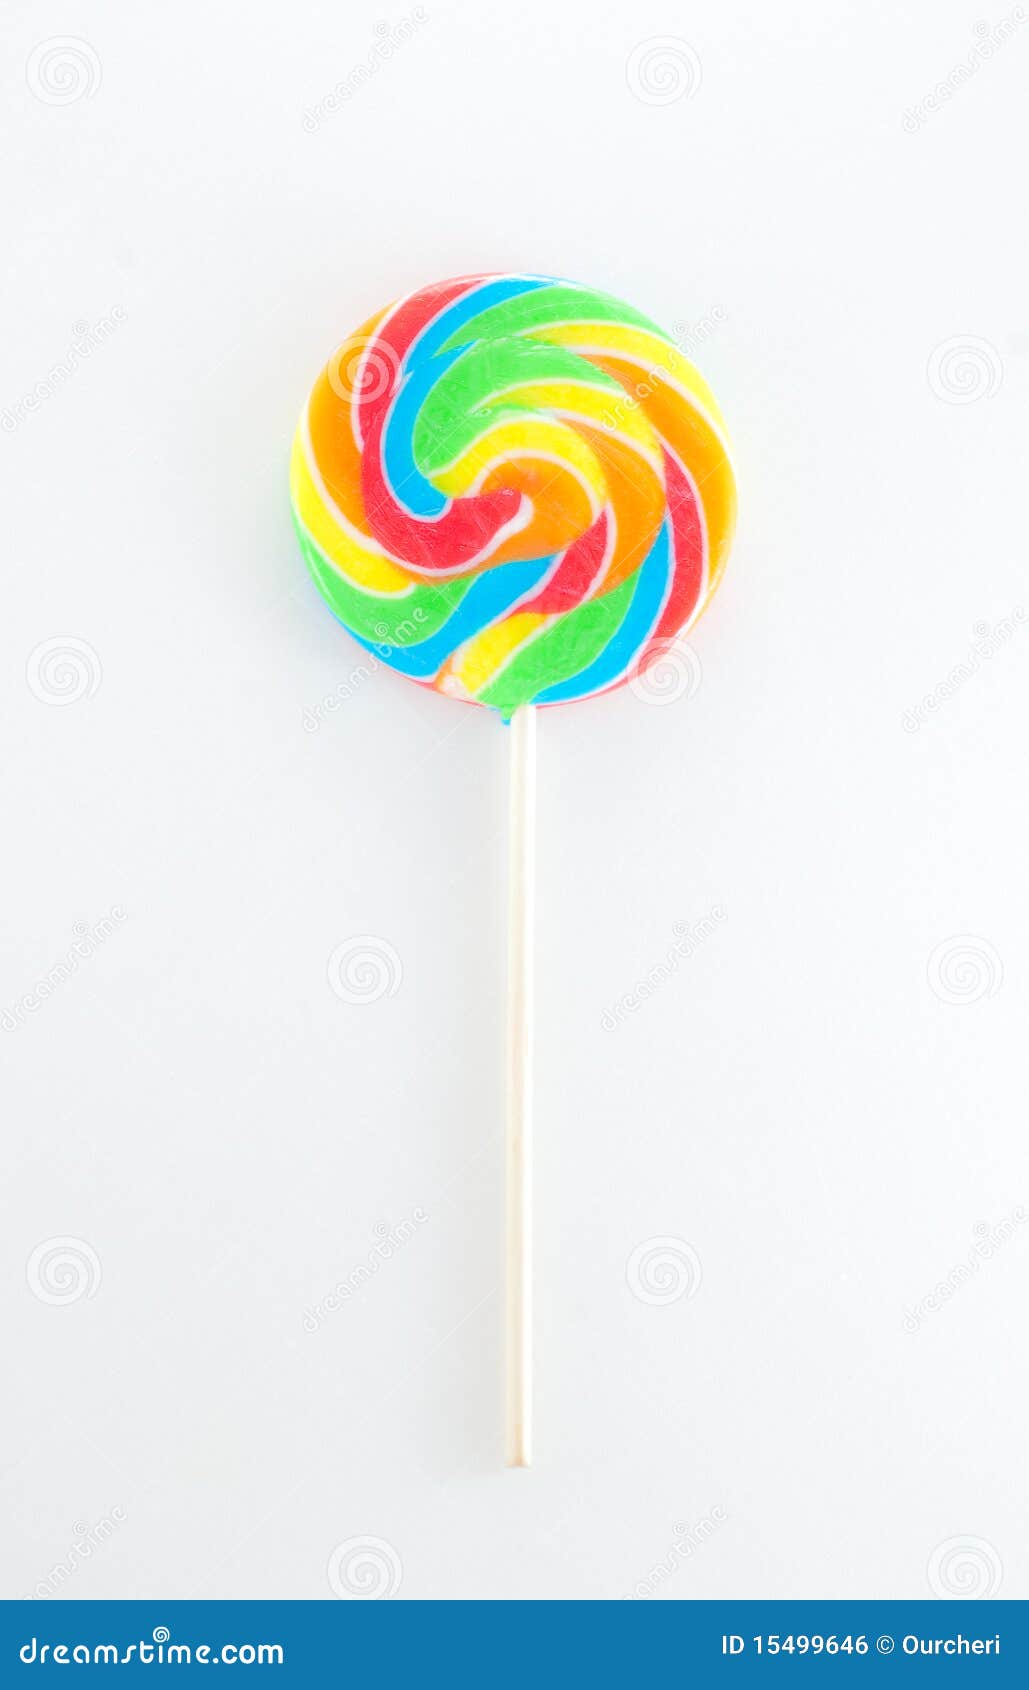 candy lolly-pop